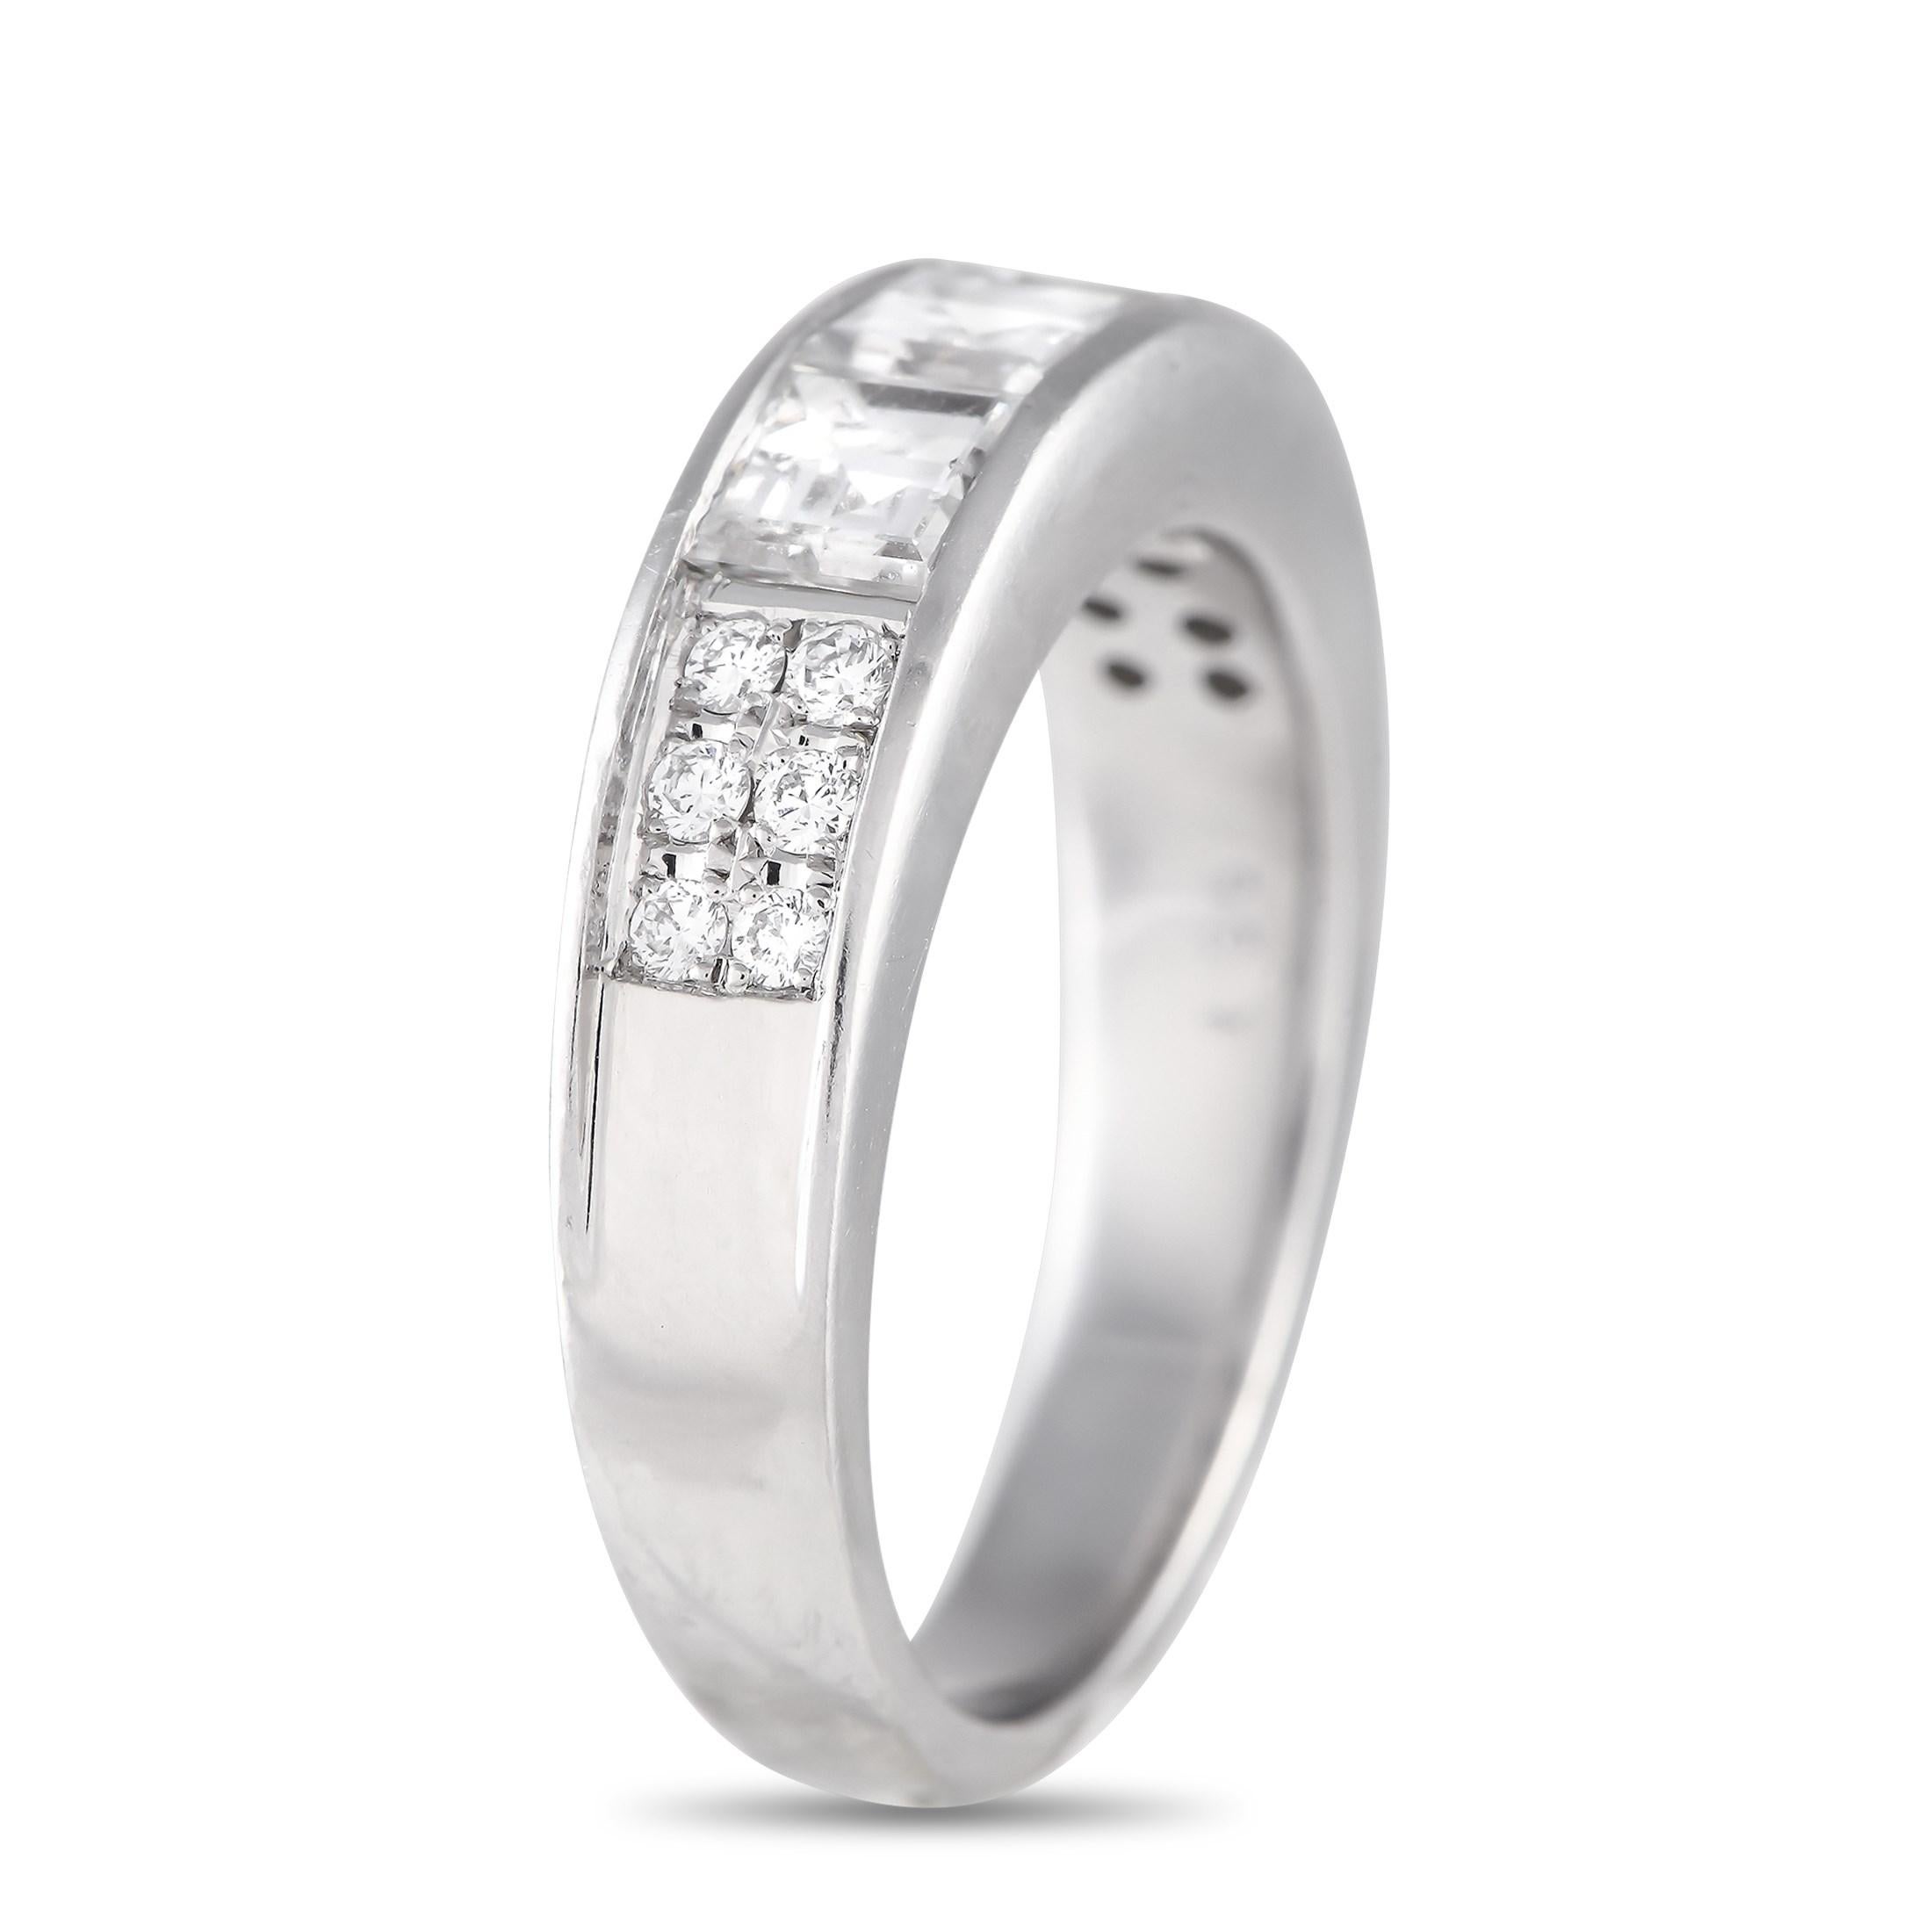 This luxurious band ring is simple, elegant, and understated. The minimalist Platinum band measures 3mm wide and features a 3mm top height, meaning it will always fit comfortably on the hand. Inset Diamonds with a total weight of 1.36 carats elevate